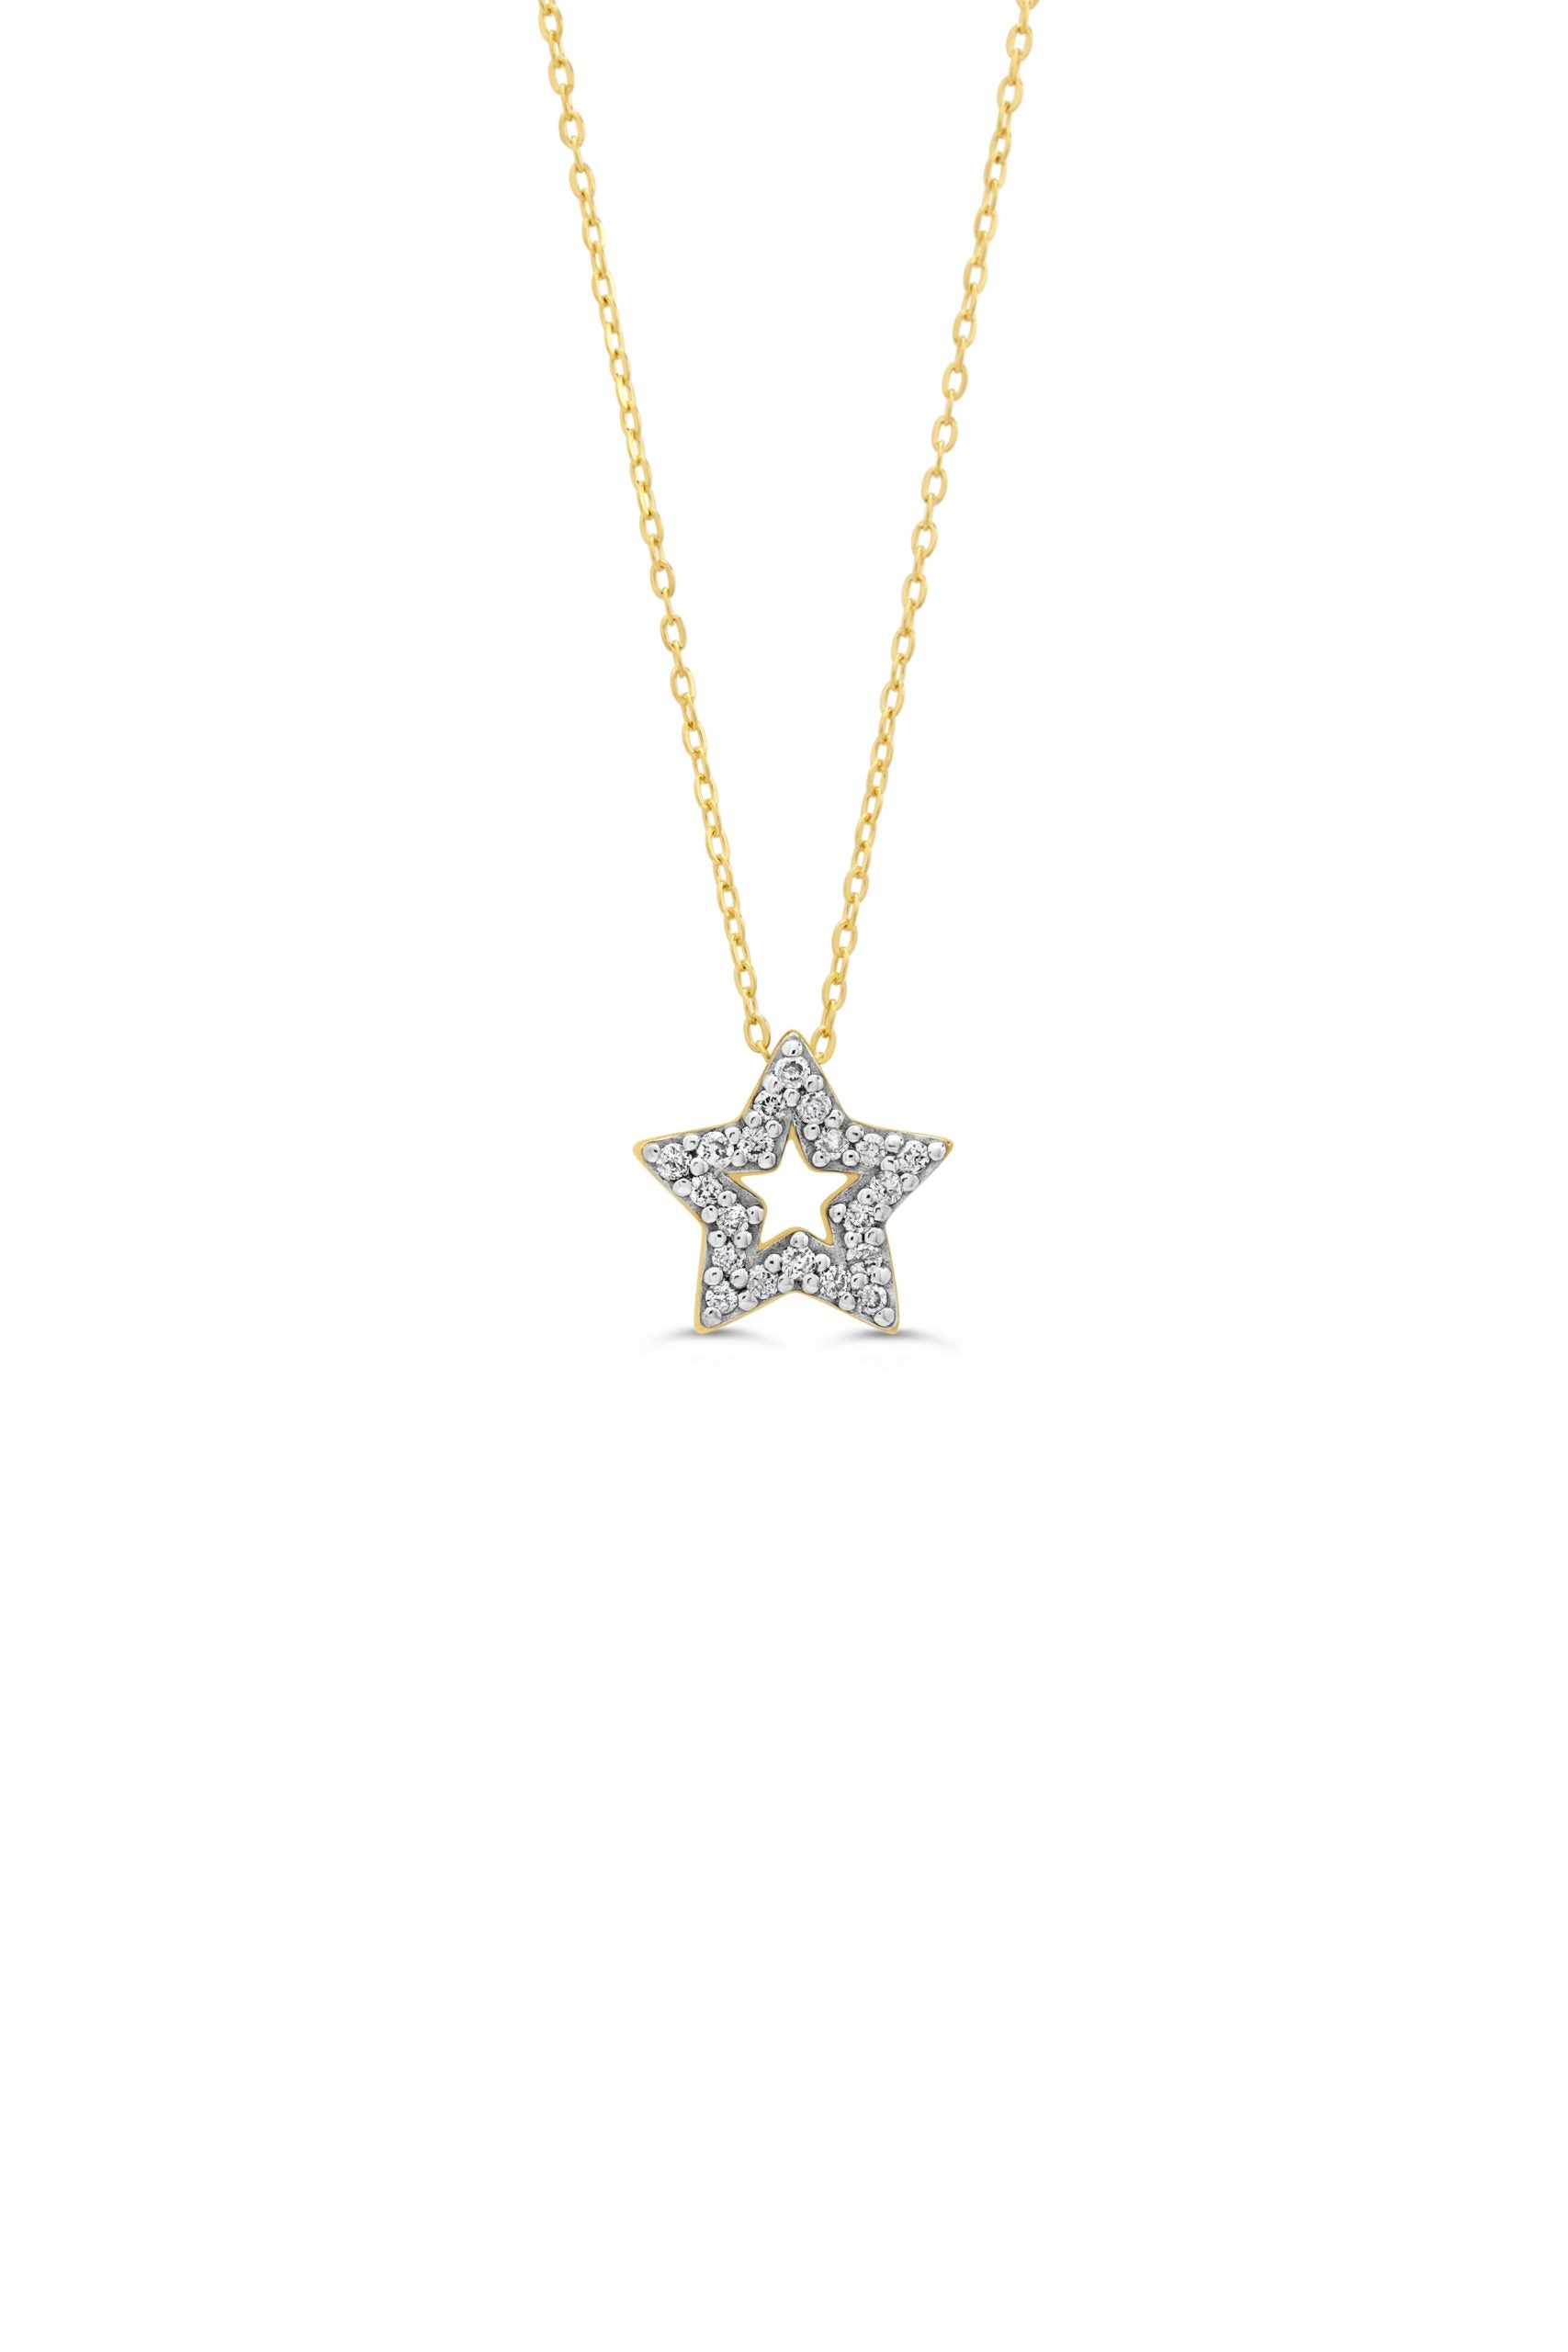 Charming 10K yellow gold star pendant encrusted with 0.05 ct of diamonds, hanging elegantly on a matching gold chain, ideal for adding a radiant touch to any ensemble.